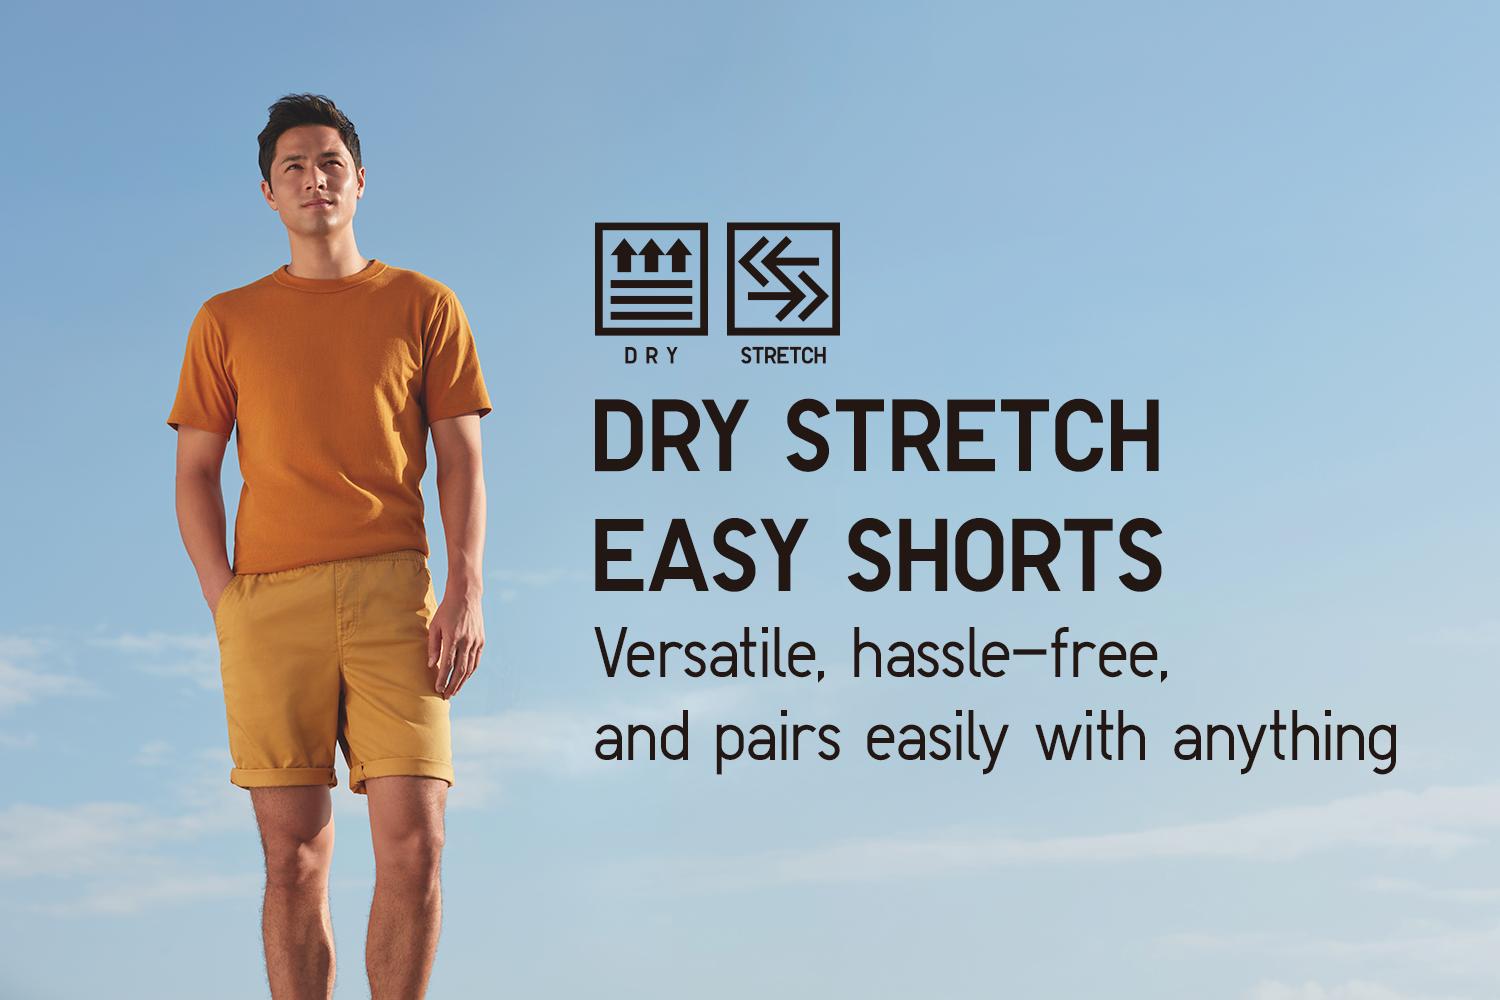 UNIQLO Philippines on X: Our Men's Dry Stretch Easy Shorts are made with  quick-drying DRY technology for a smooth and light feel this summer. Try a  pair today and experience versatility and